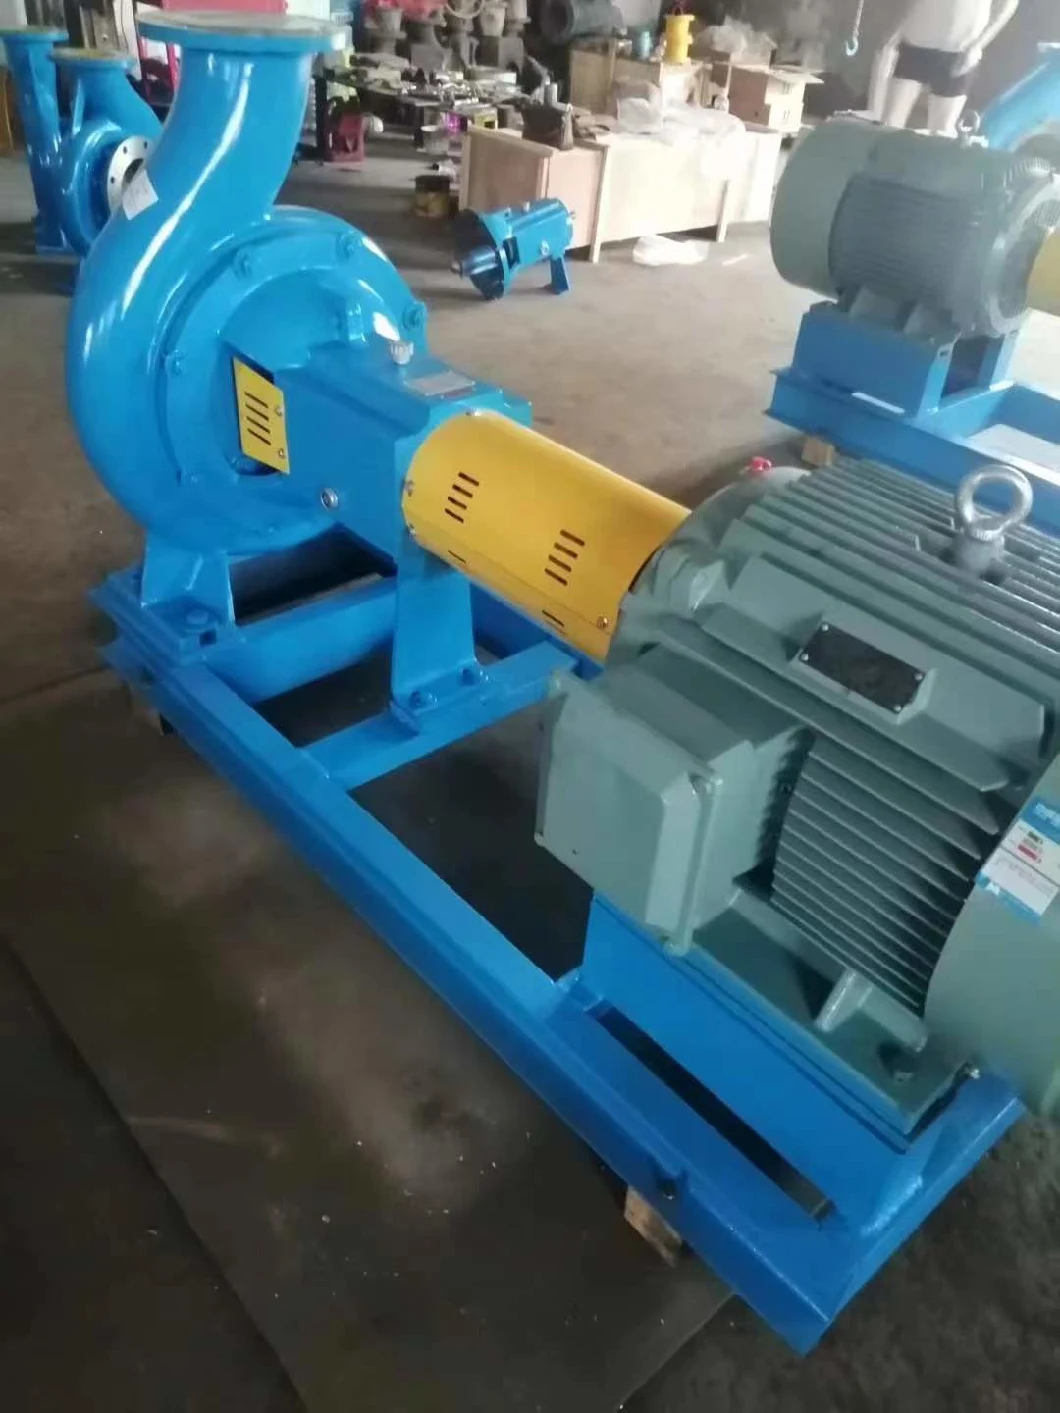 Double/End Suction/Multistage Centrifugal Pump/Submersible/Vacuum/Oil/Pulp/Screw/Diaphragm/Magnetic/Inline/Self-Priming/Sewage/Chemical/Fire/Water/Electric Pump